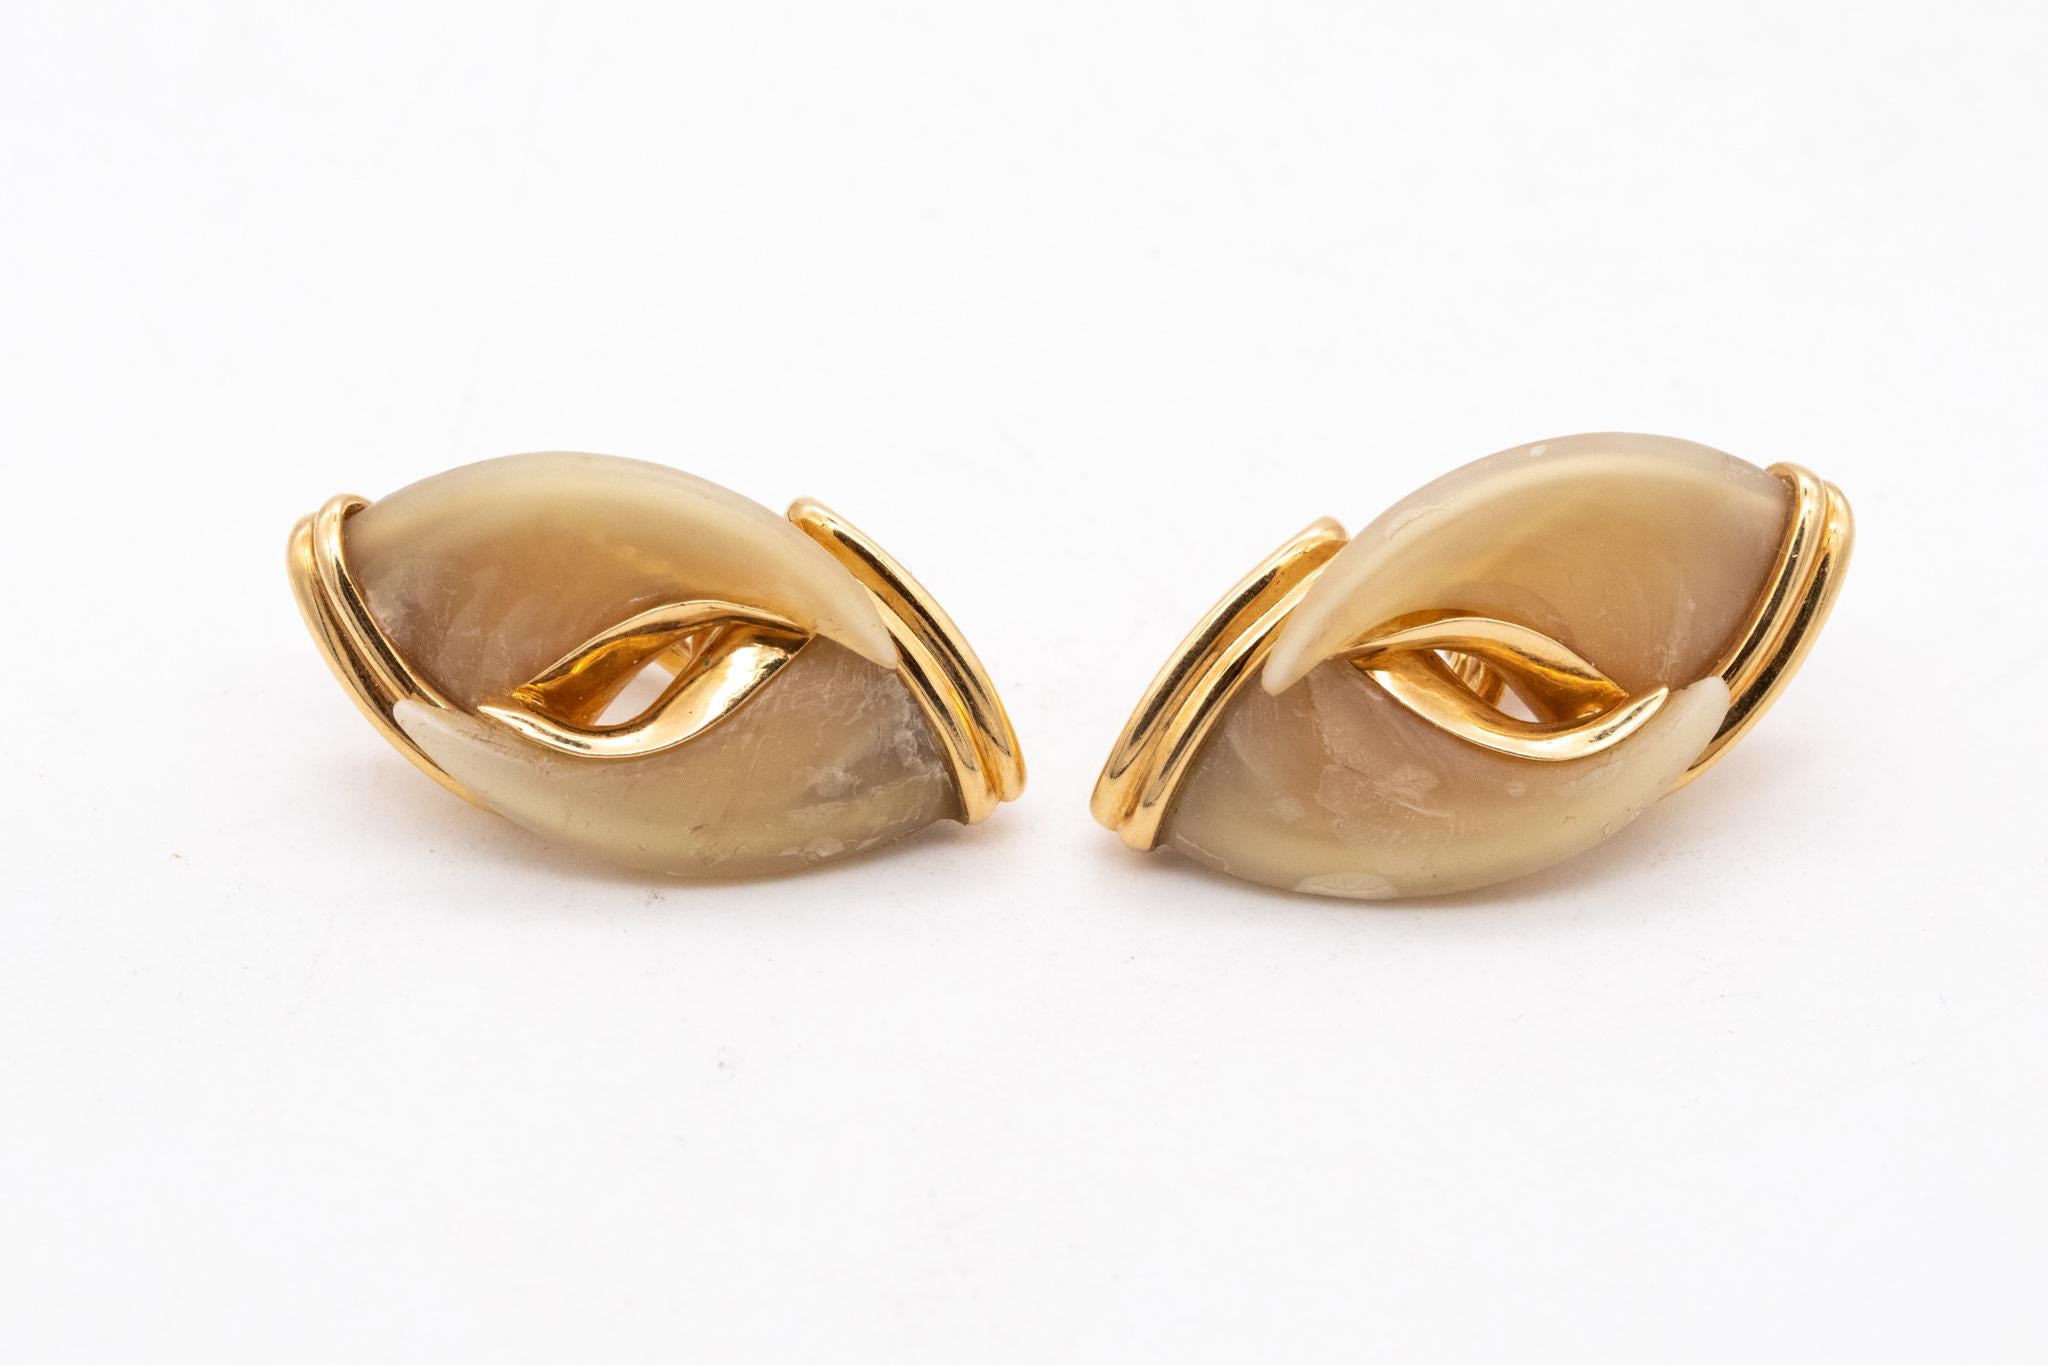 Bry & Co Paris 1970 Rare French Earrings In 18Kt Yellow Gold With Four Claws For Sale 2